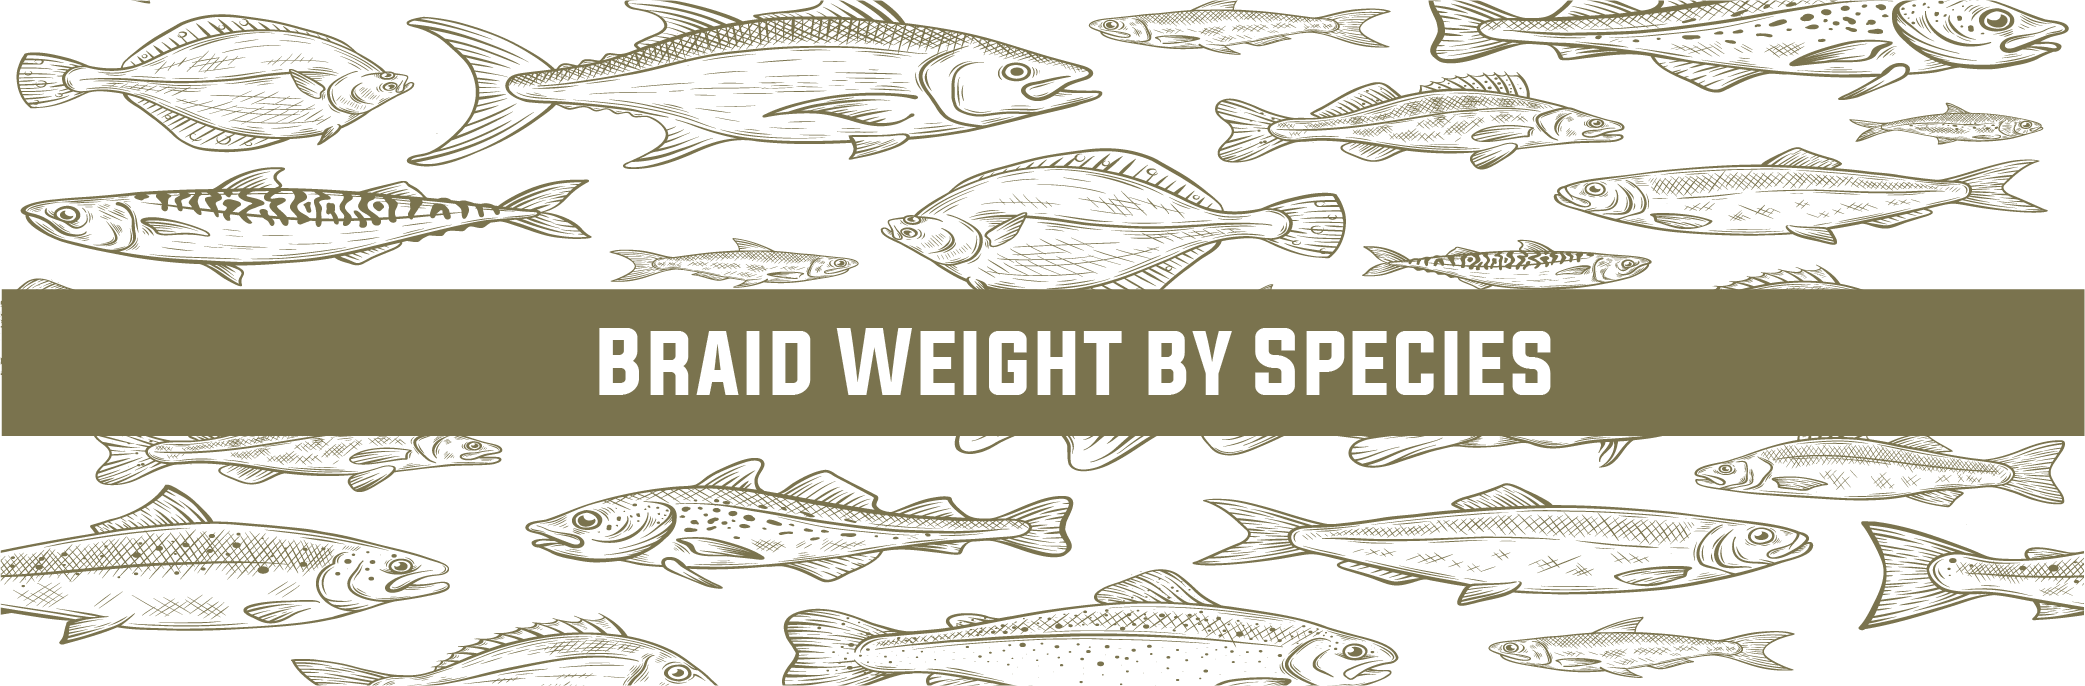 Braided Fishing Line Weight Guide by Species – FINS Braids